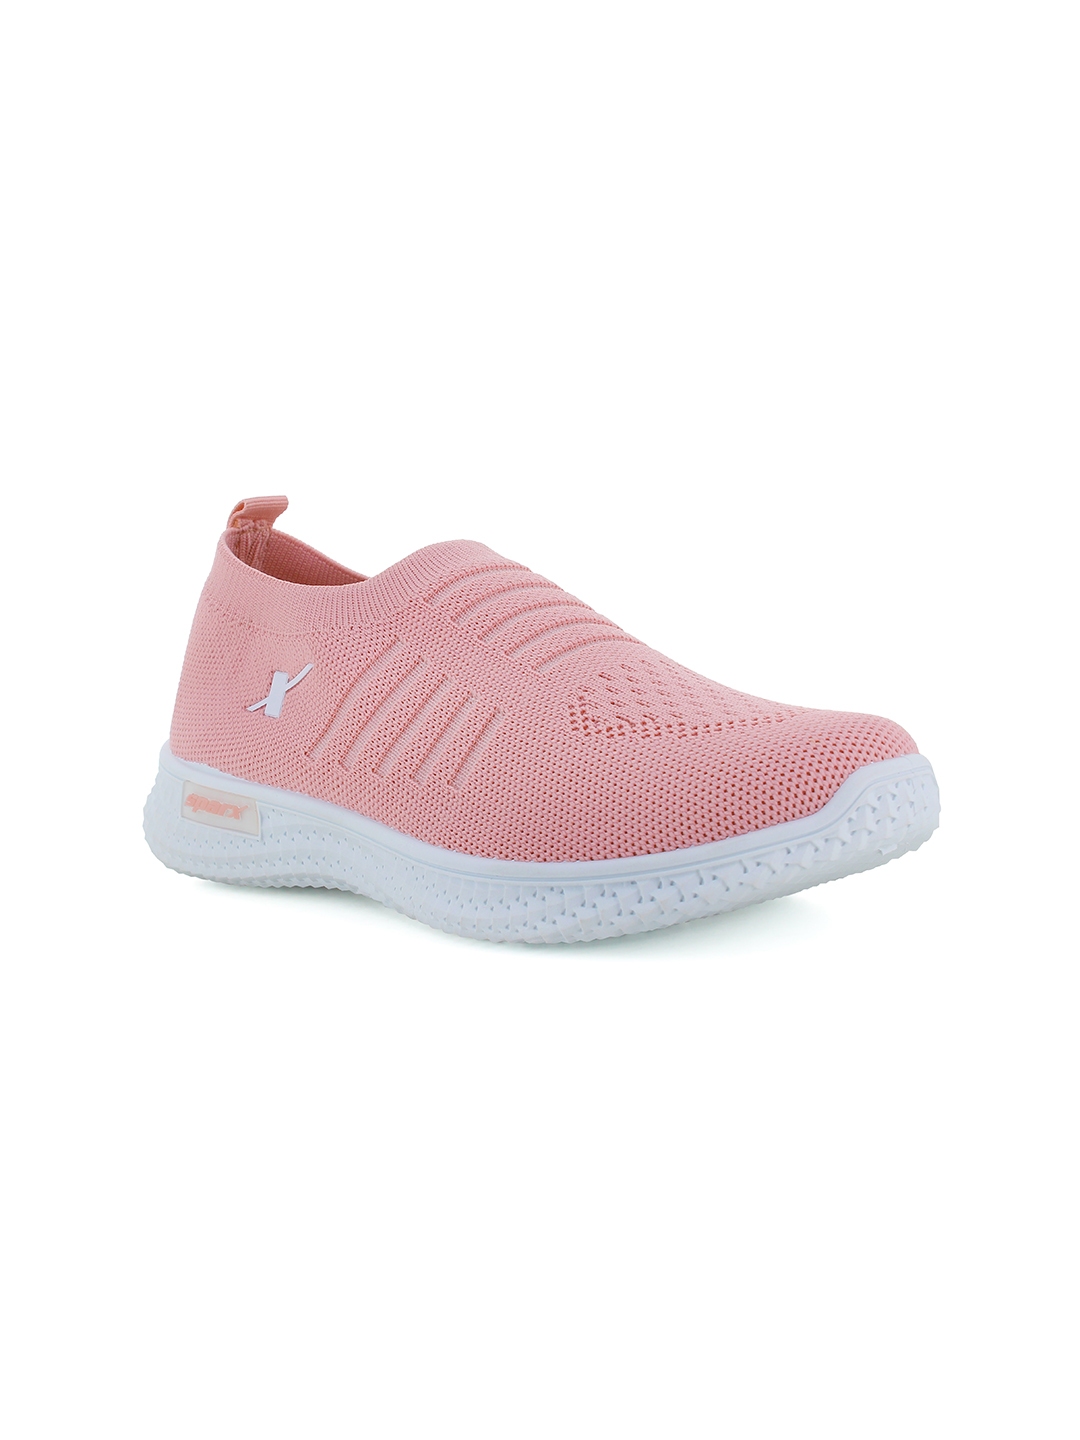 6ec131b5 E5c8 4db1 A3b6 6f27d89e696b1629874094522 Sparx Women Pink  White Mesh Running Shoes 2401629874094161 1 